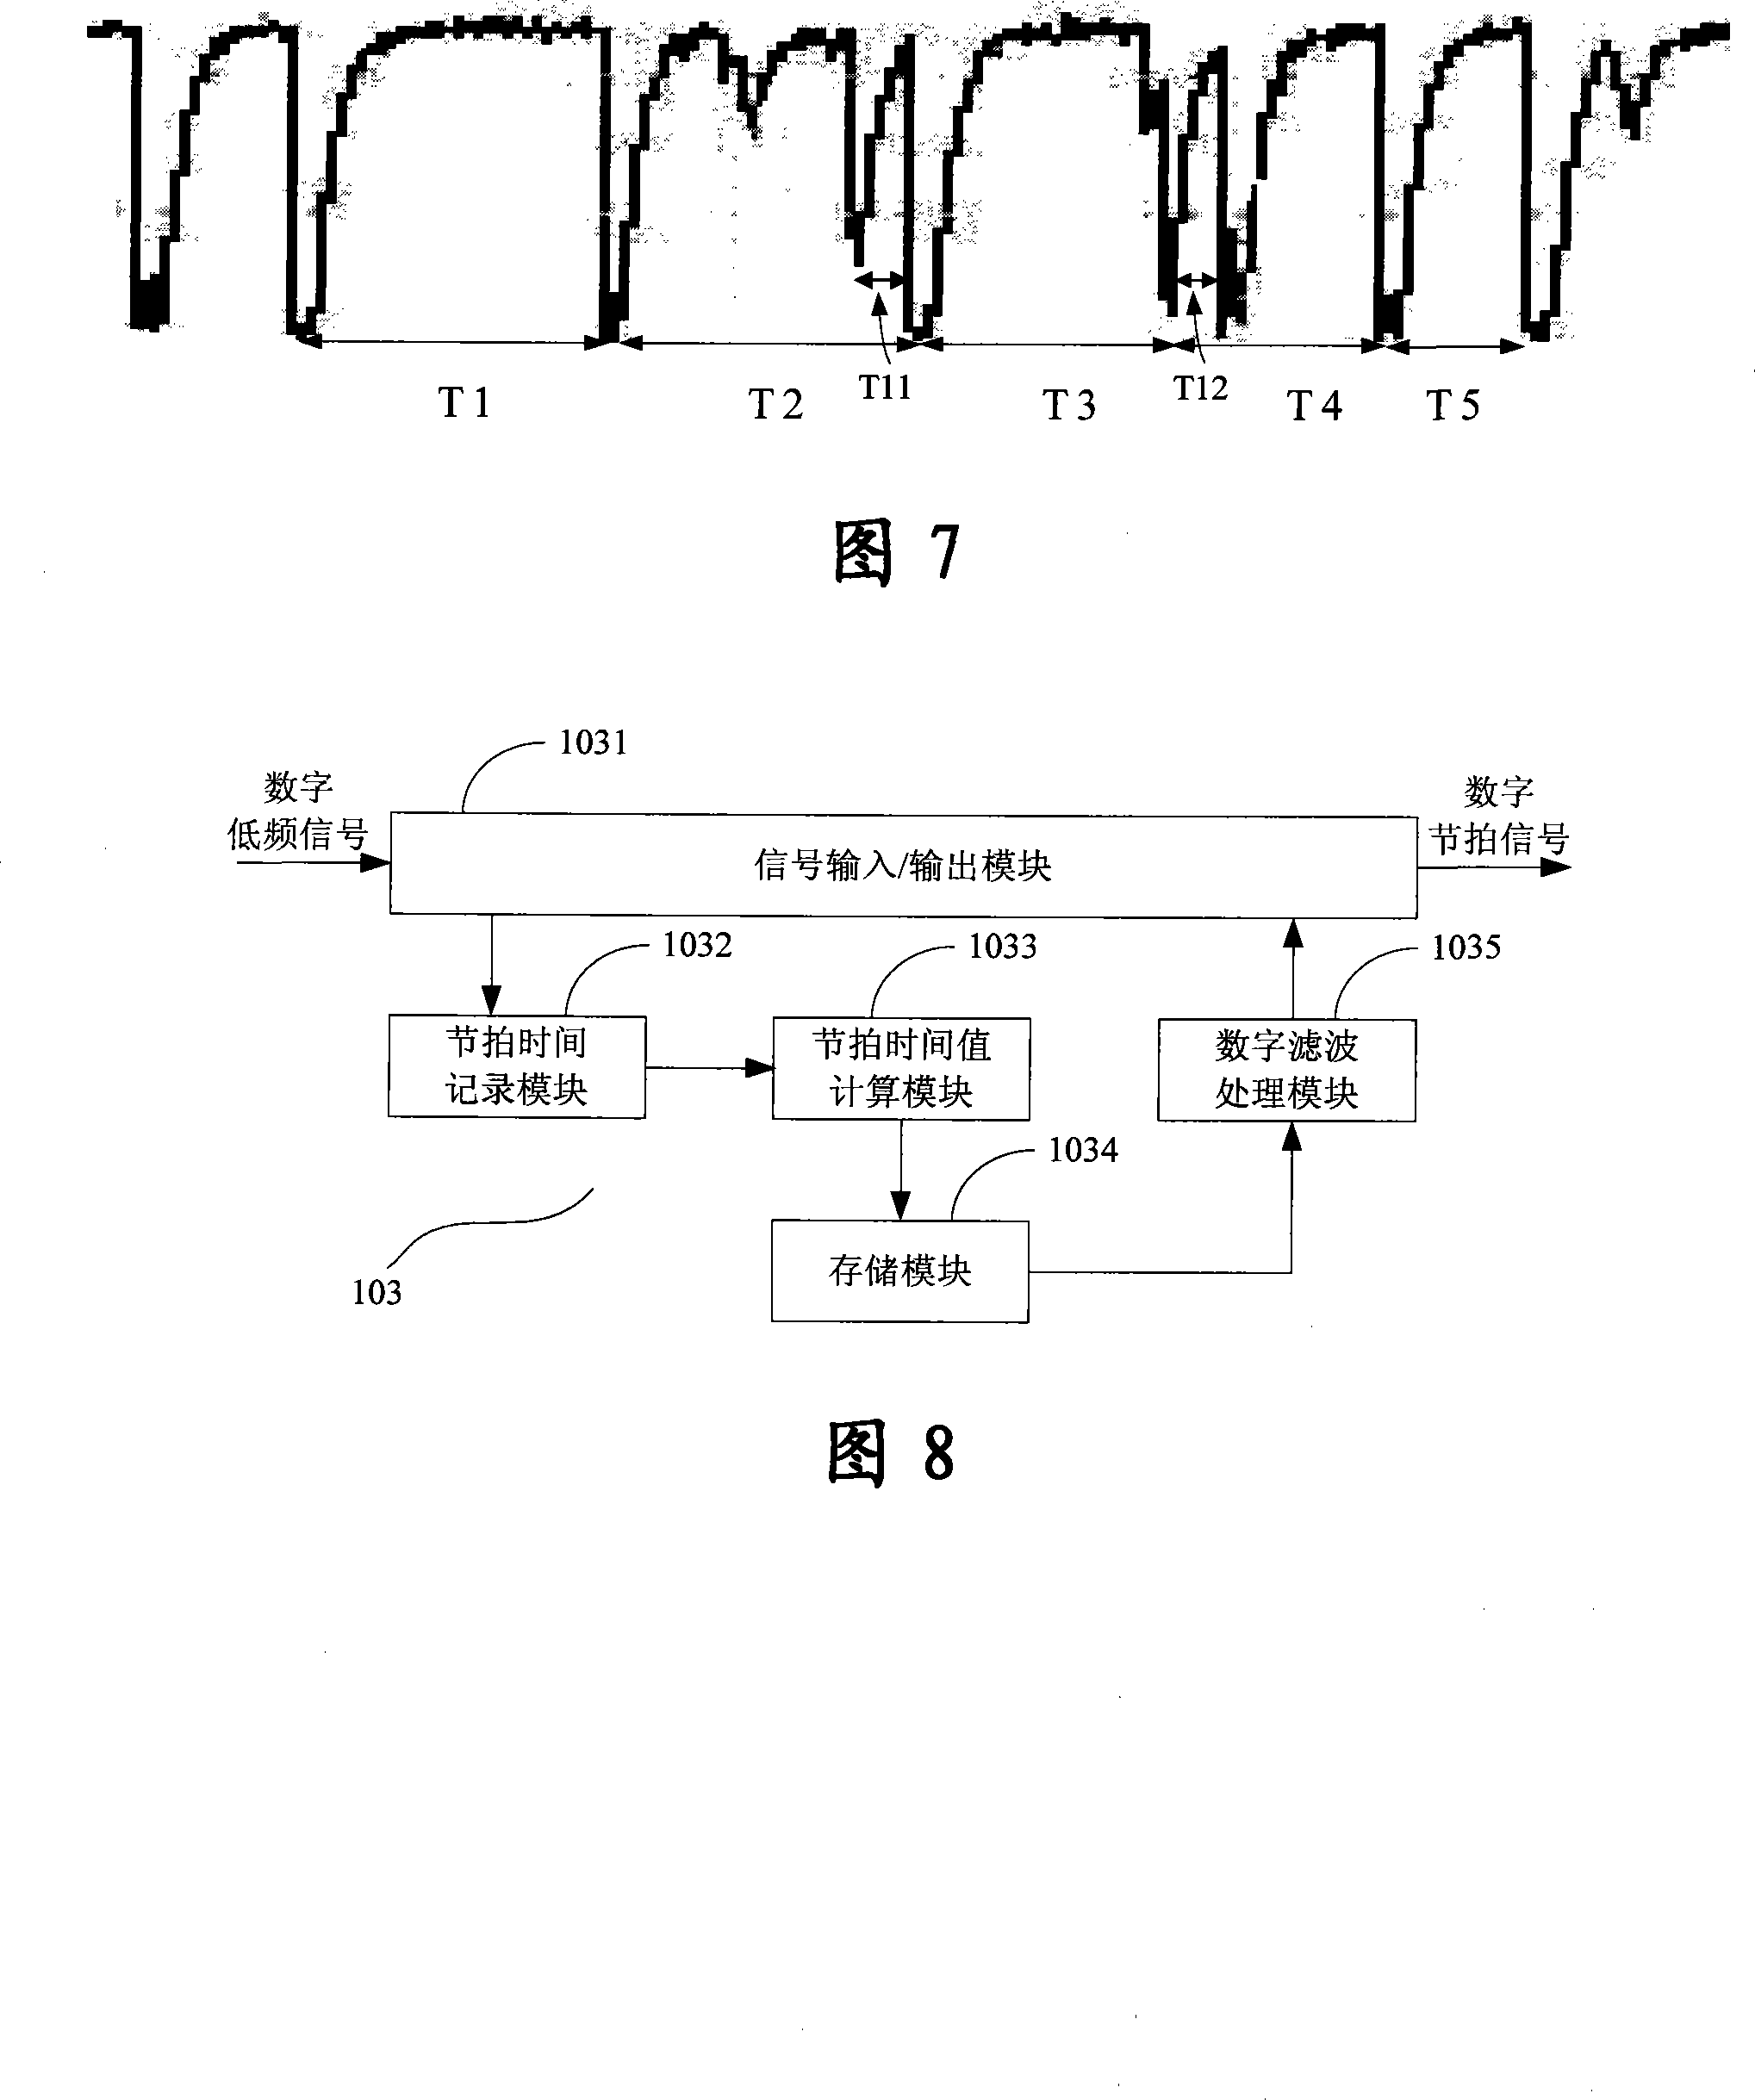 Music beat detection device and its method